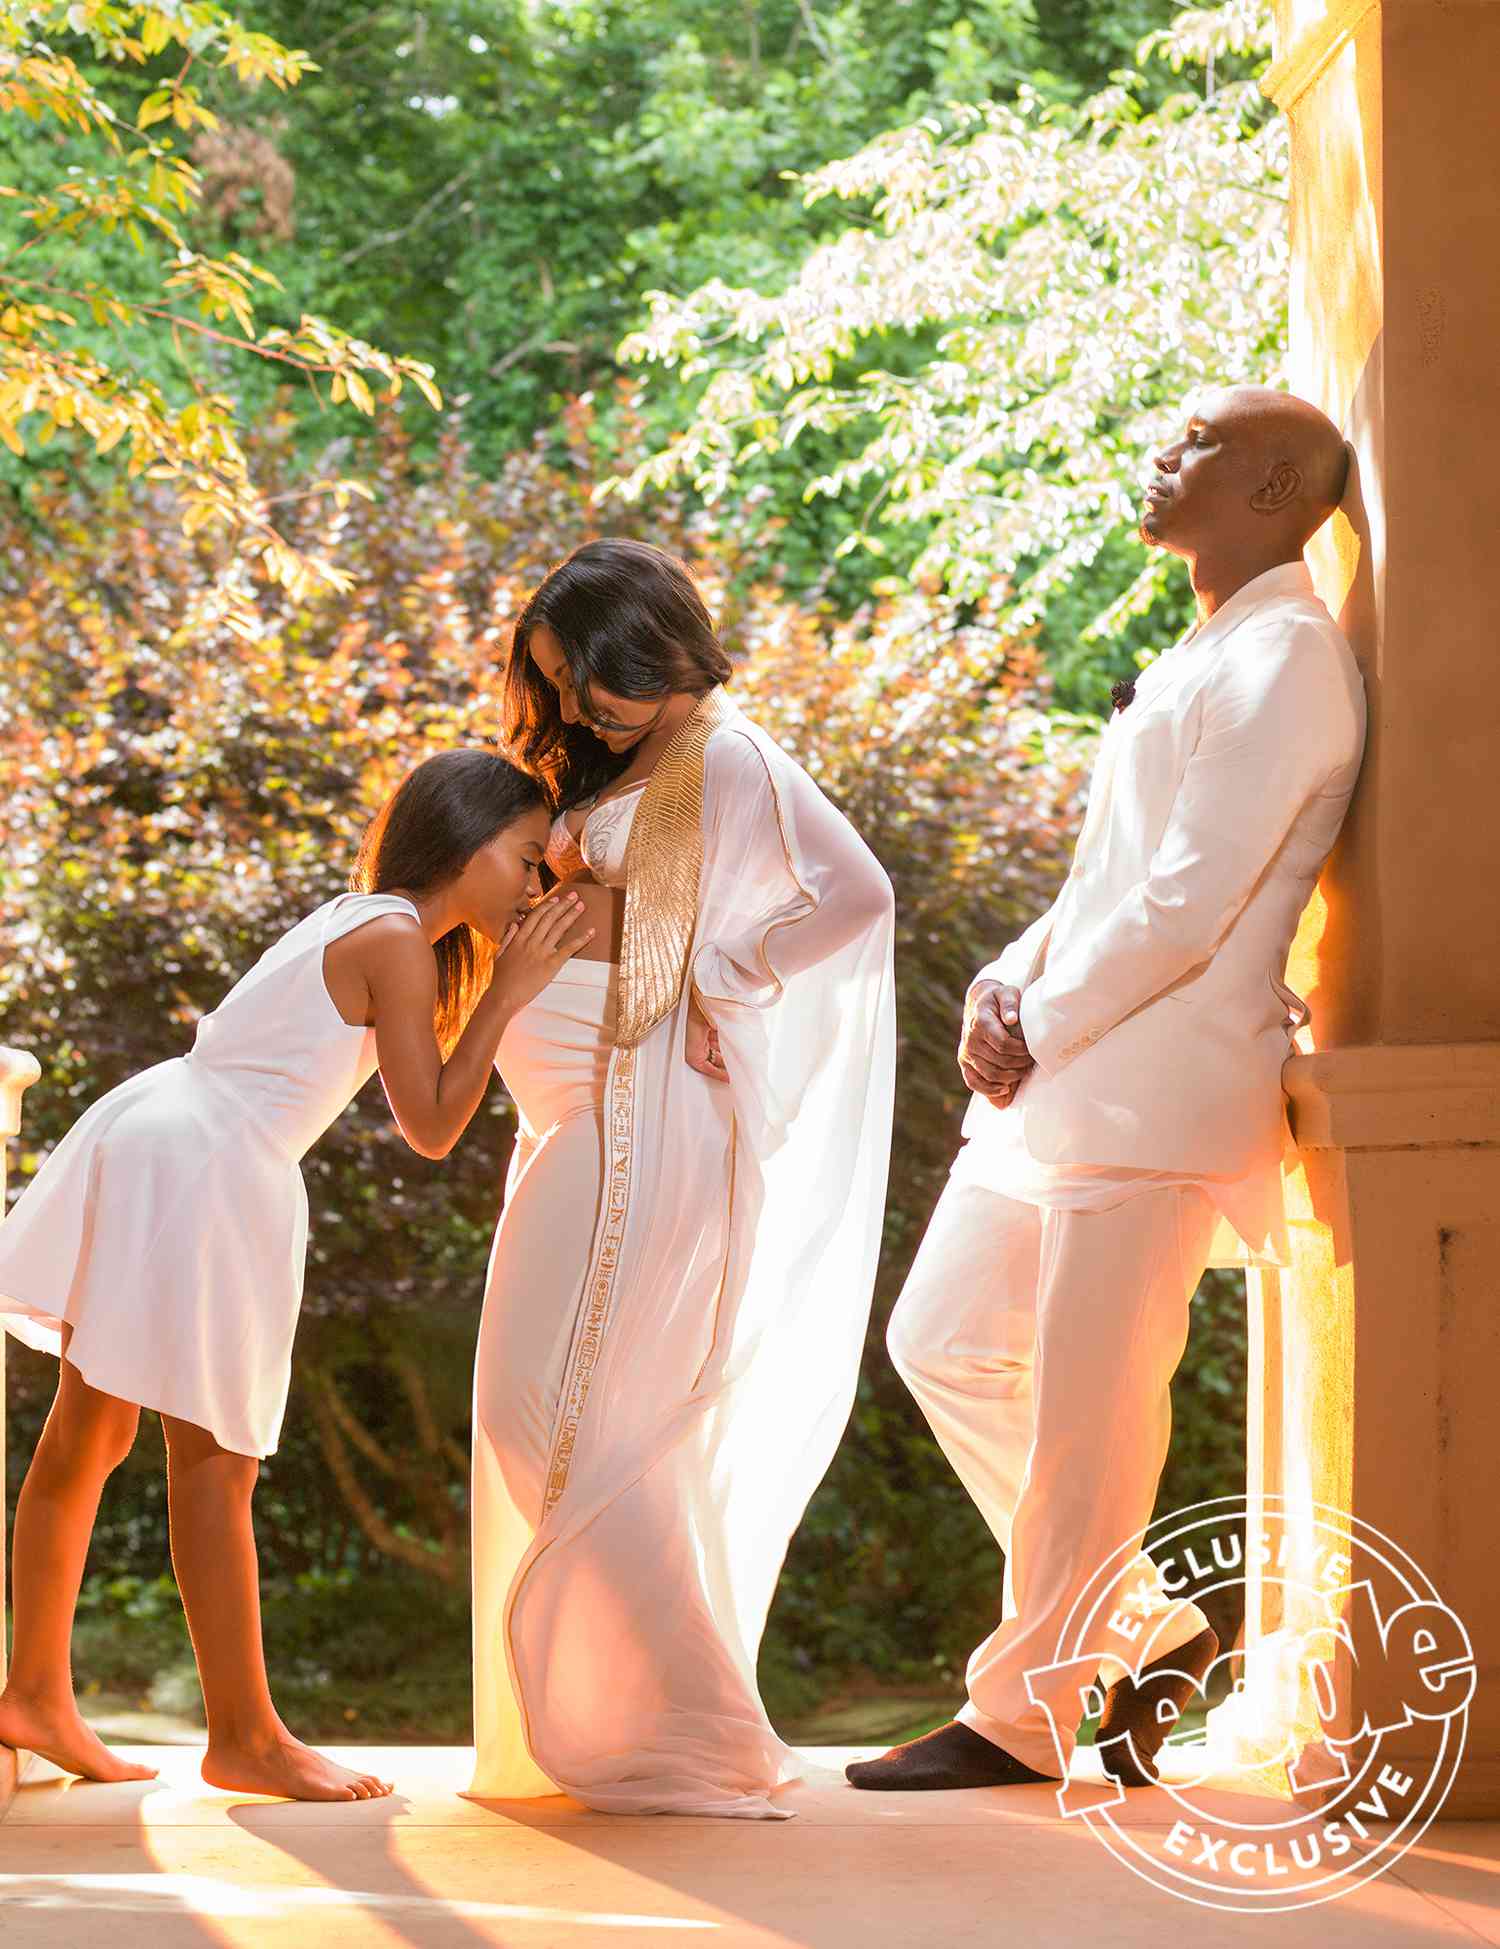 Tyrese and Pregnant Wife Samantha Pose in Maternity Shoot | PEOPLE.com